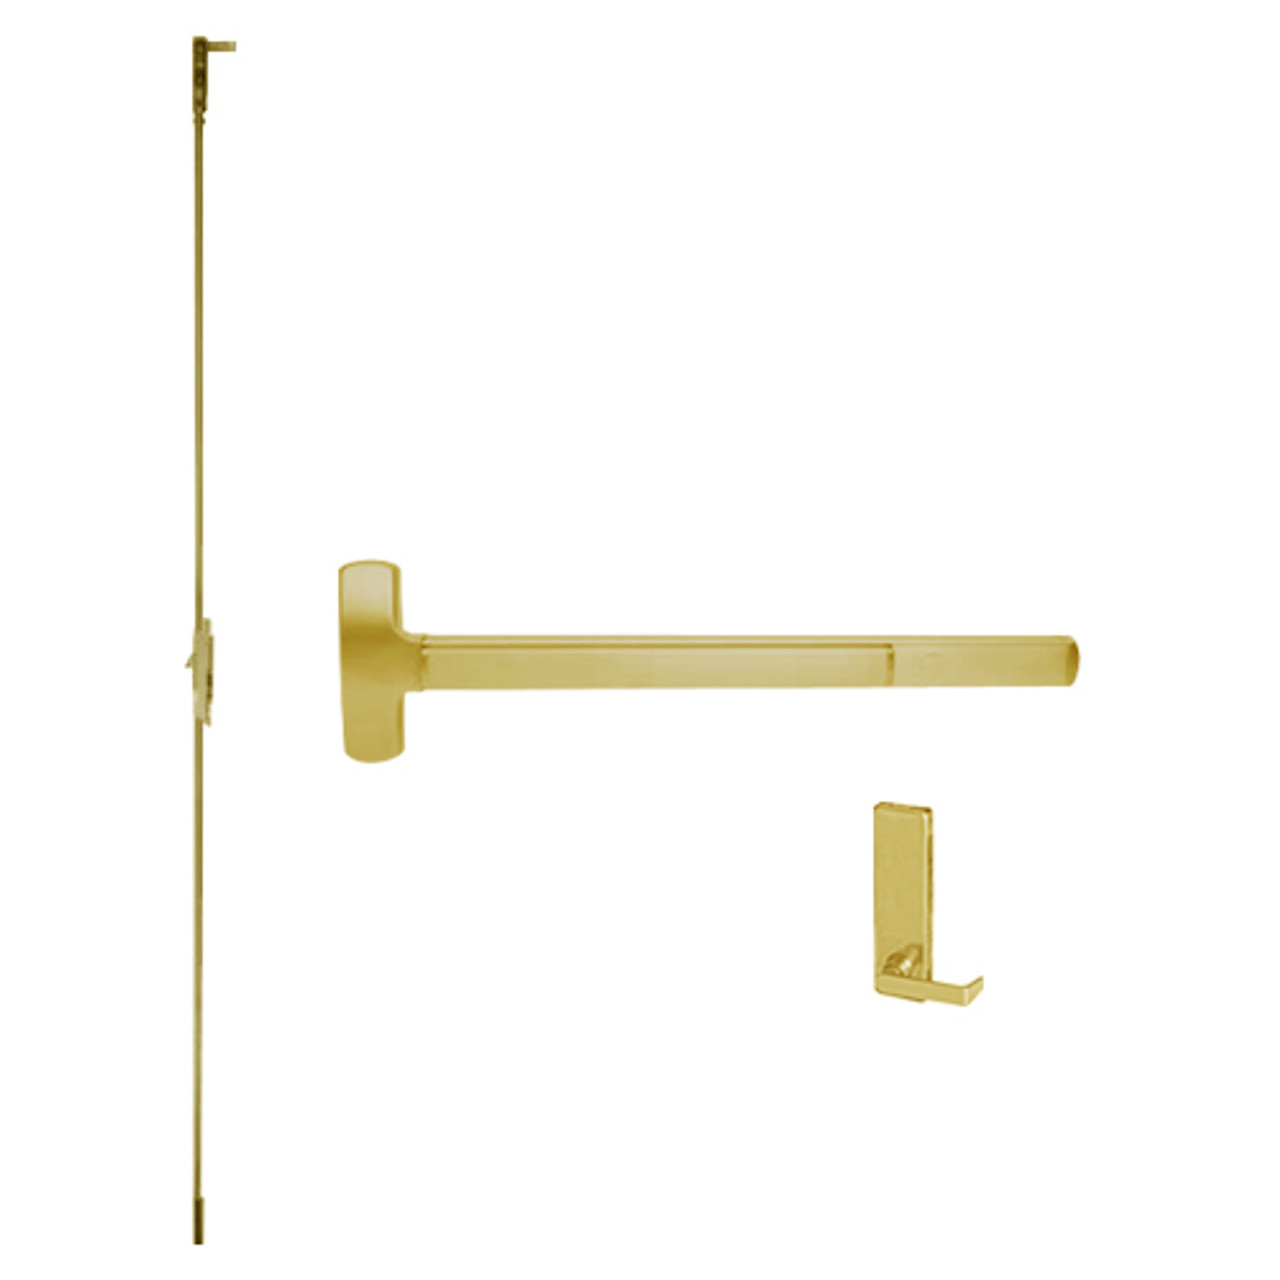 F-25-C-L-BE-DANE-US3-4-RHR Falcon Exit Device in Polished Brass